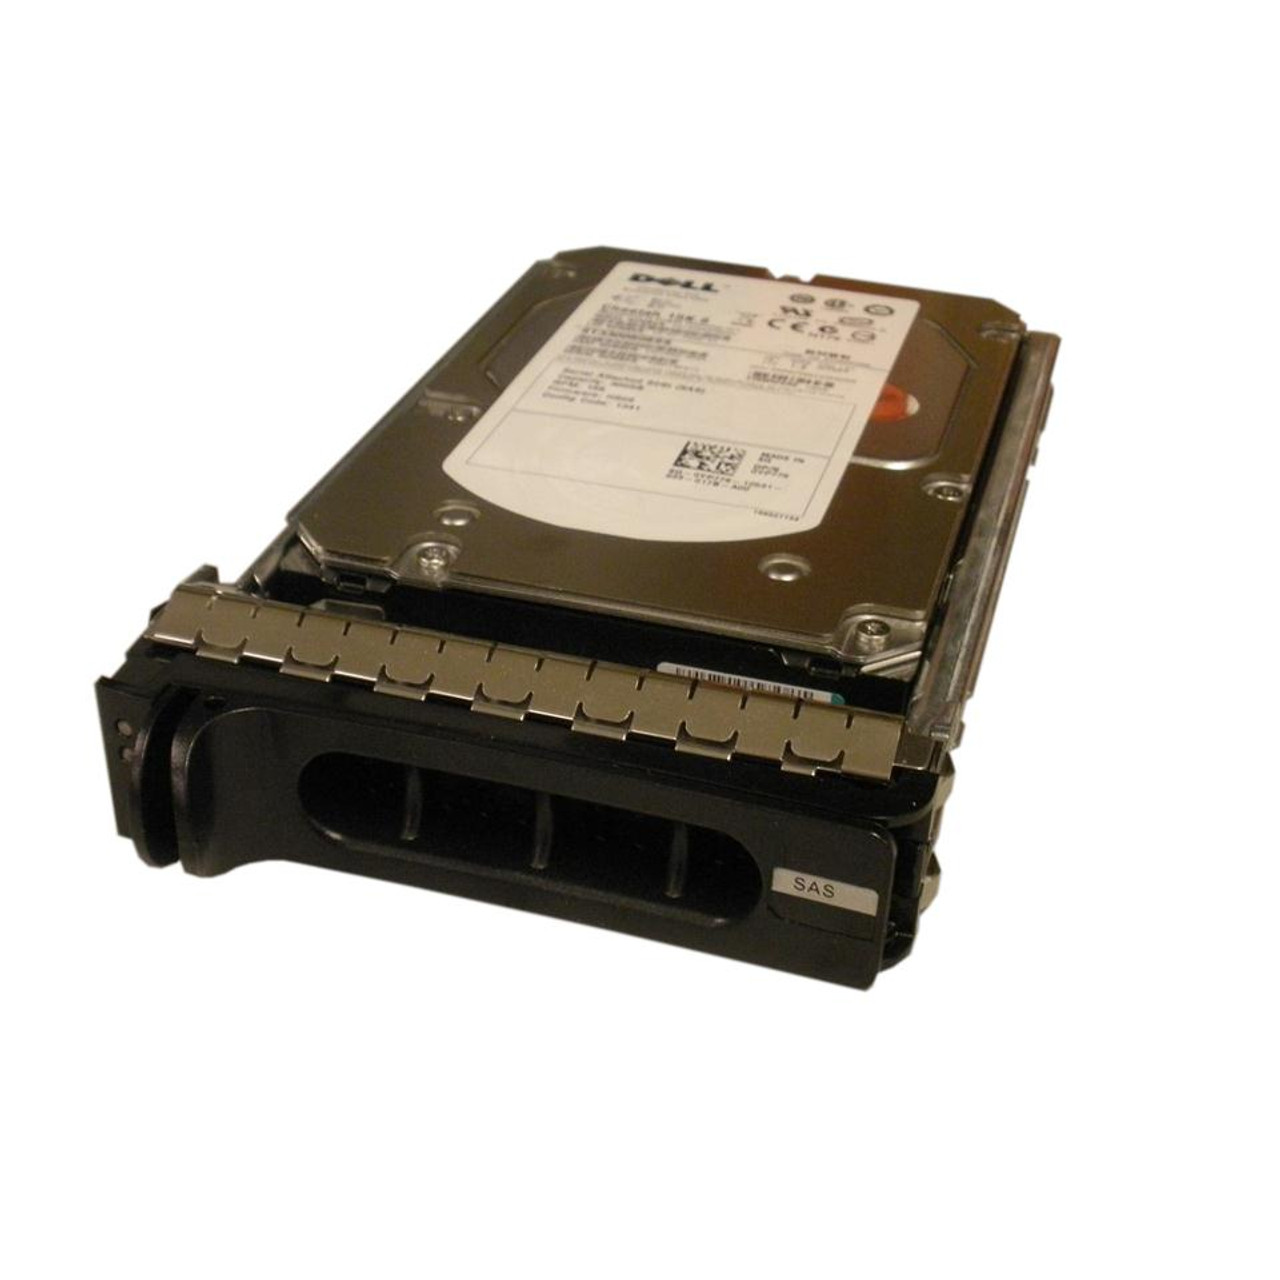 341-9206 - Dell 1TB 7200RPM SAS 3GB/s 3.5-inch Hard Drive with Tray for PowerEdge & PowerVault Server